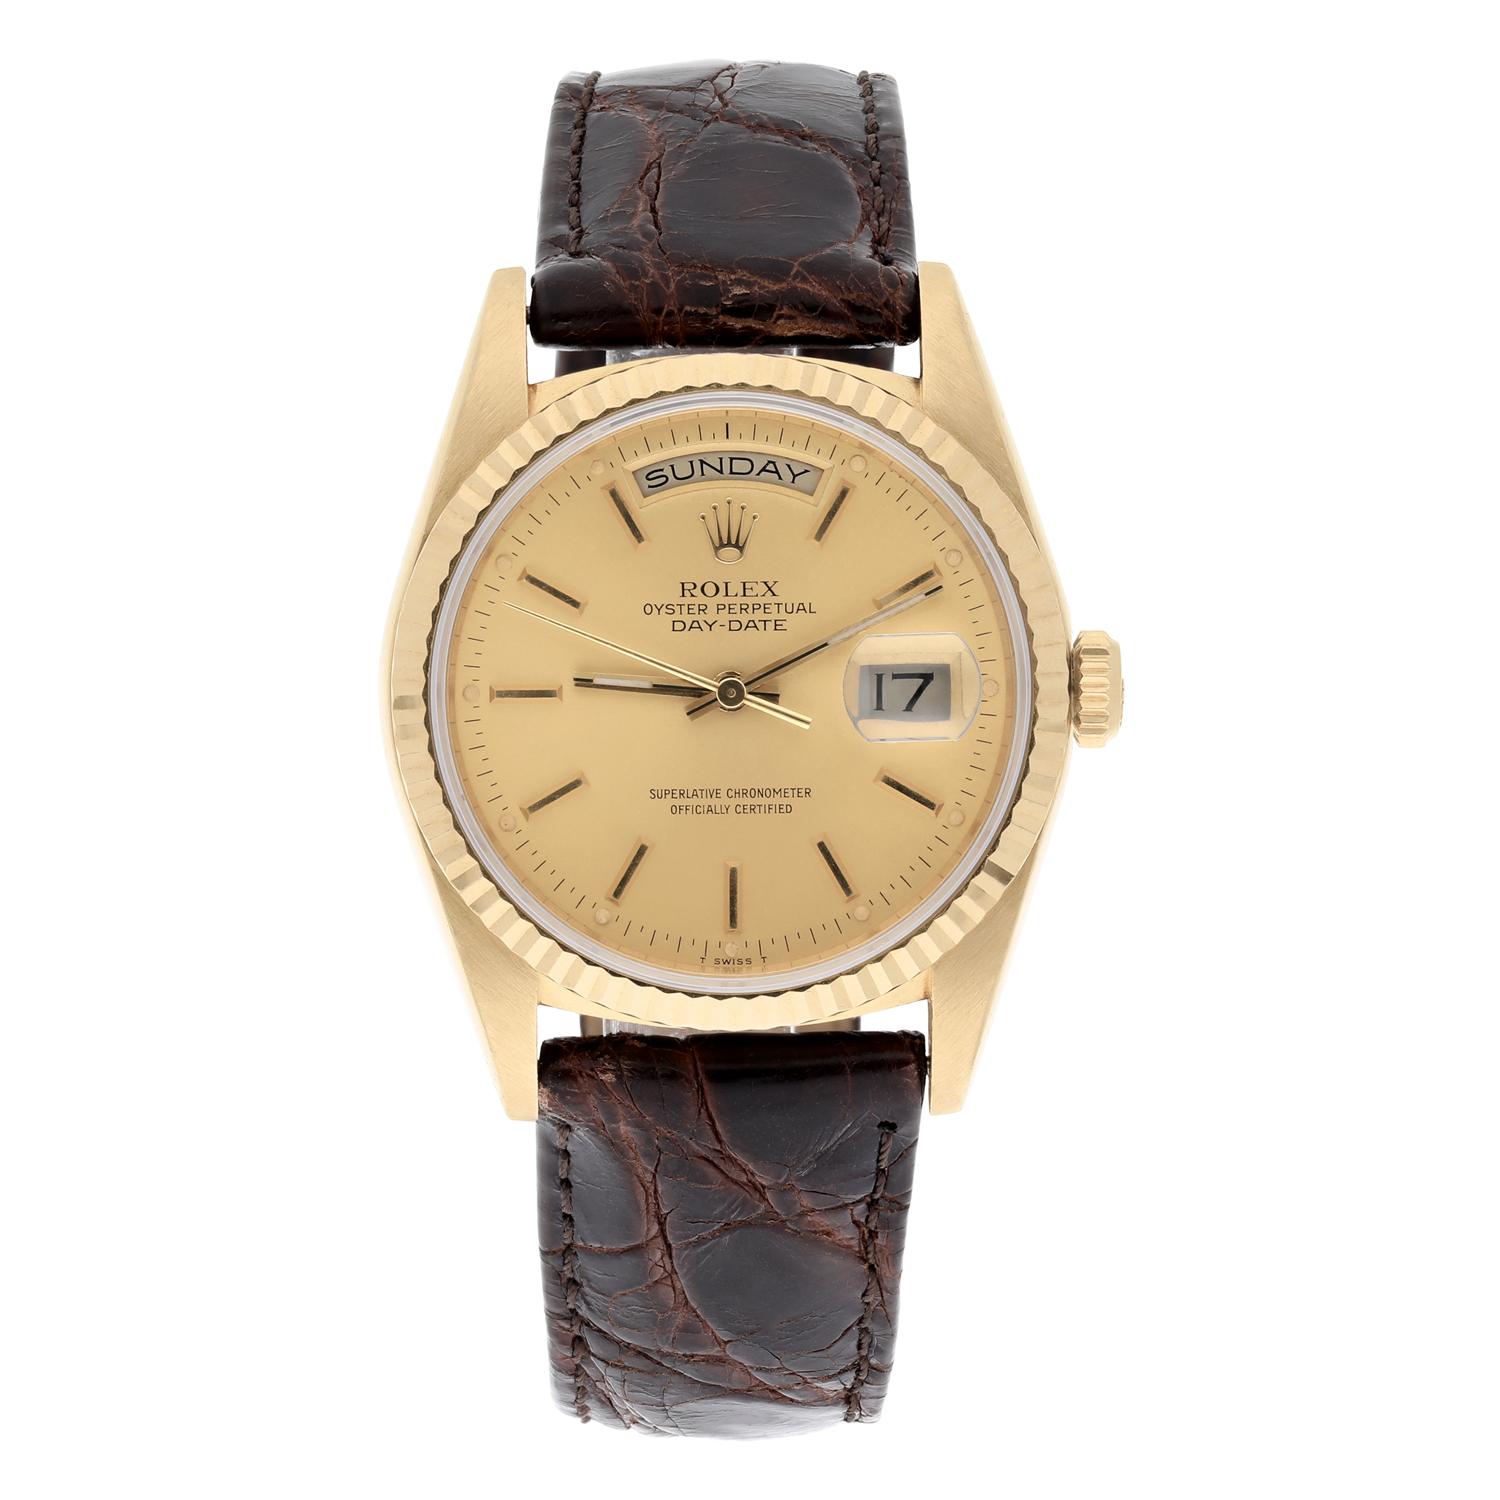 This watch has been professionally polished, serviced and does not have any visible scratches or blemishes. Leather strap and gold plated buckle are custom aftermarket. The watch itself is a genuine Rolex which has been inspected to verify